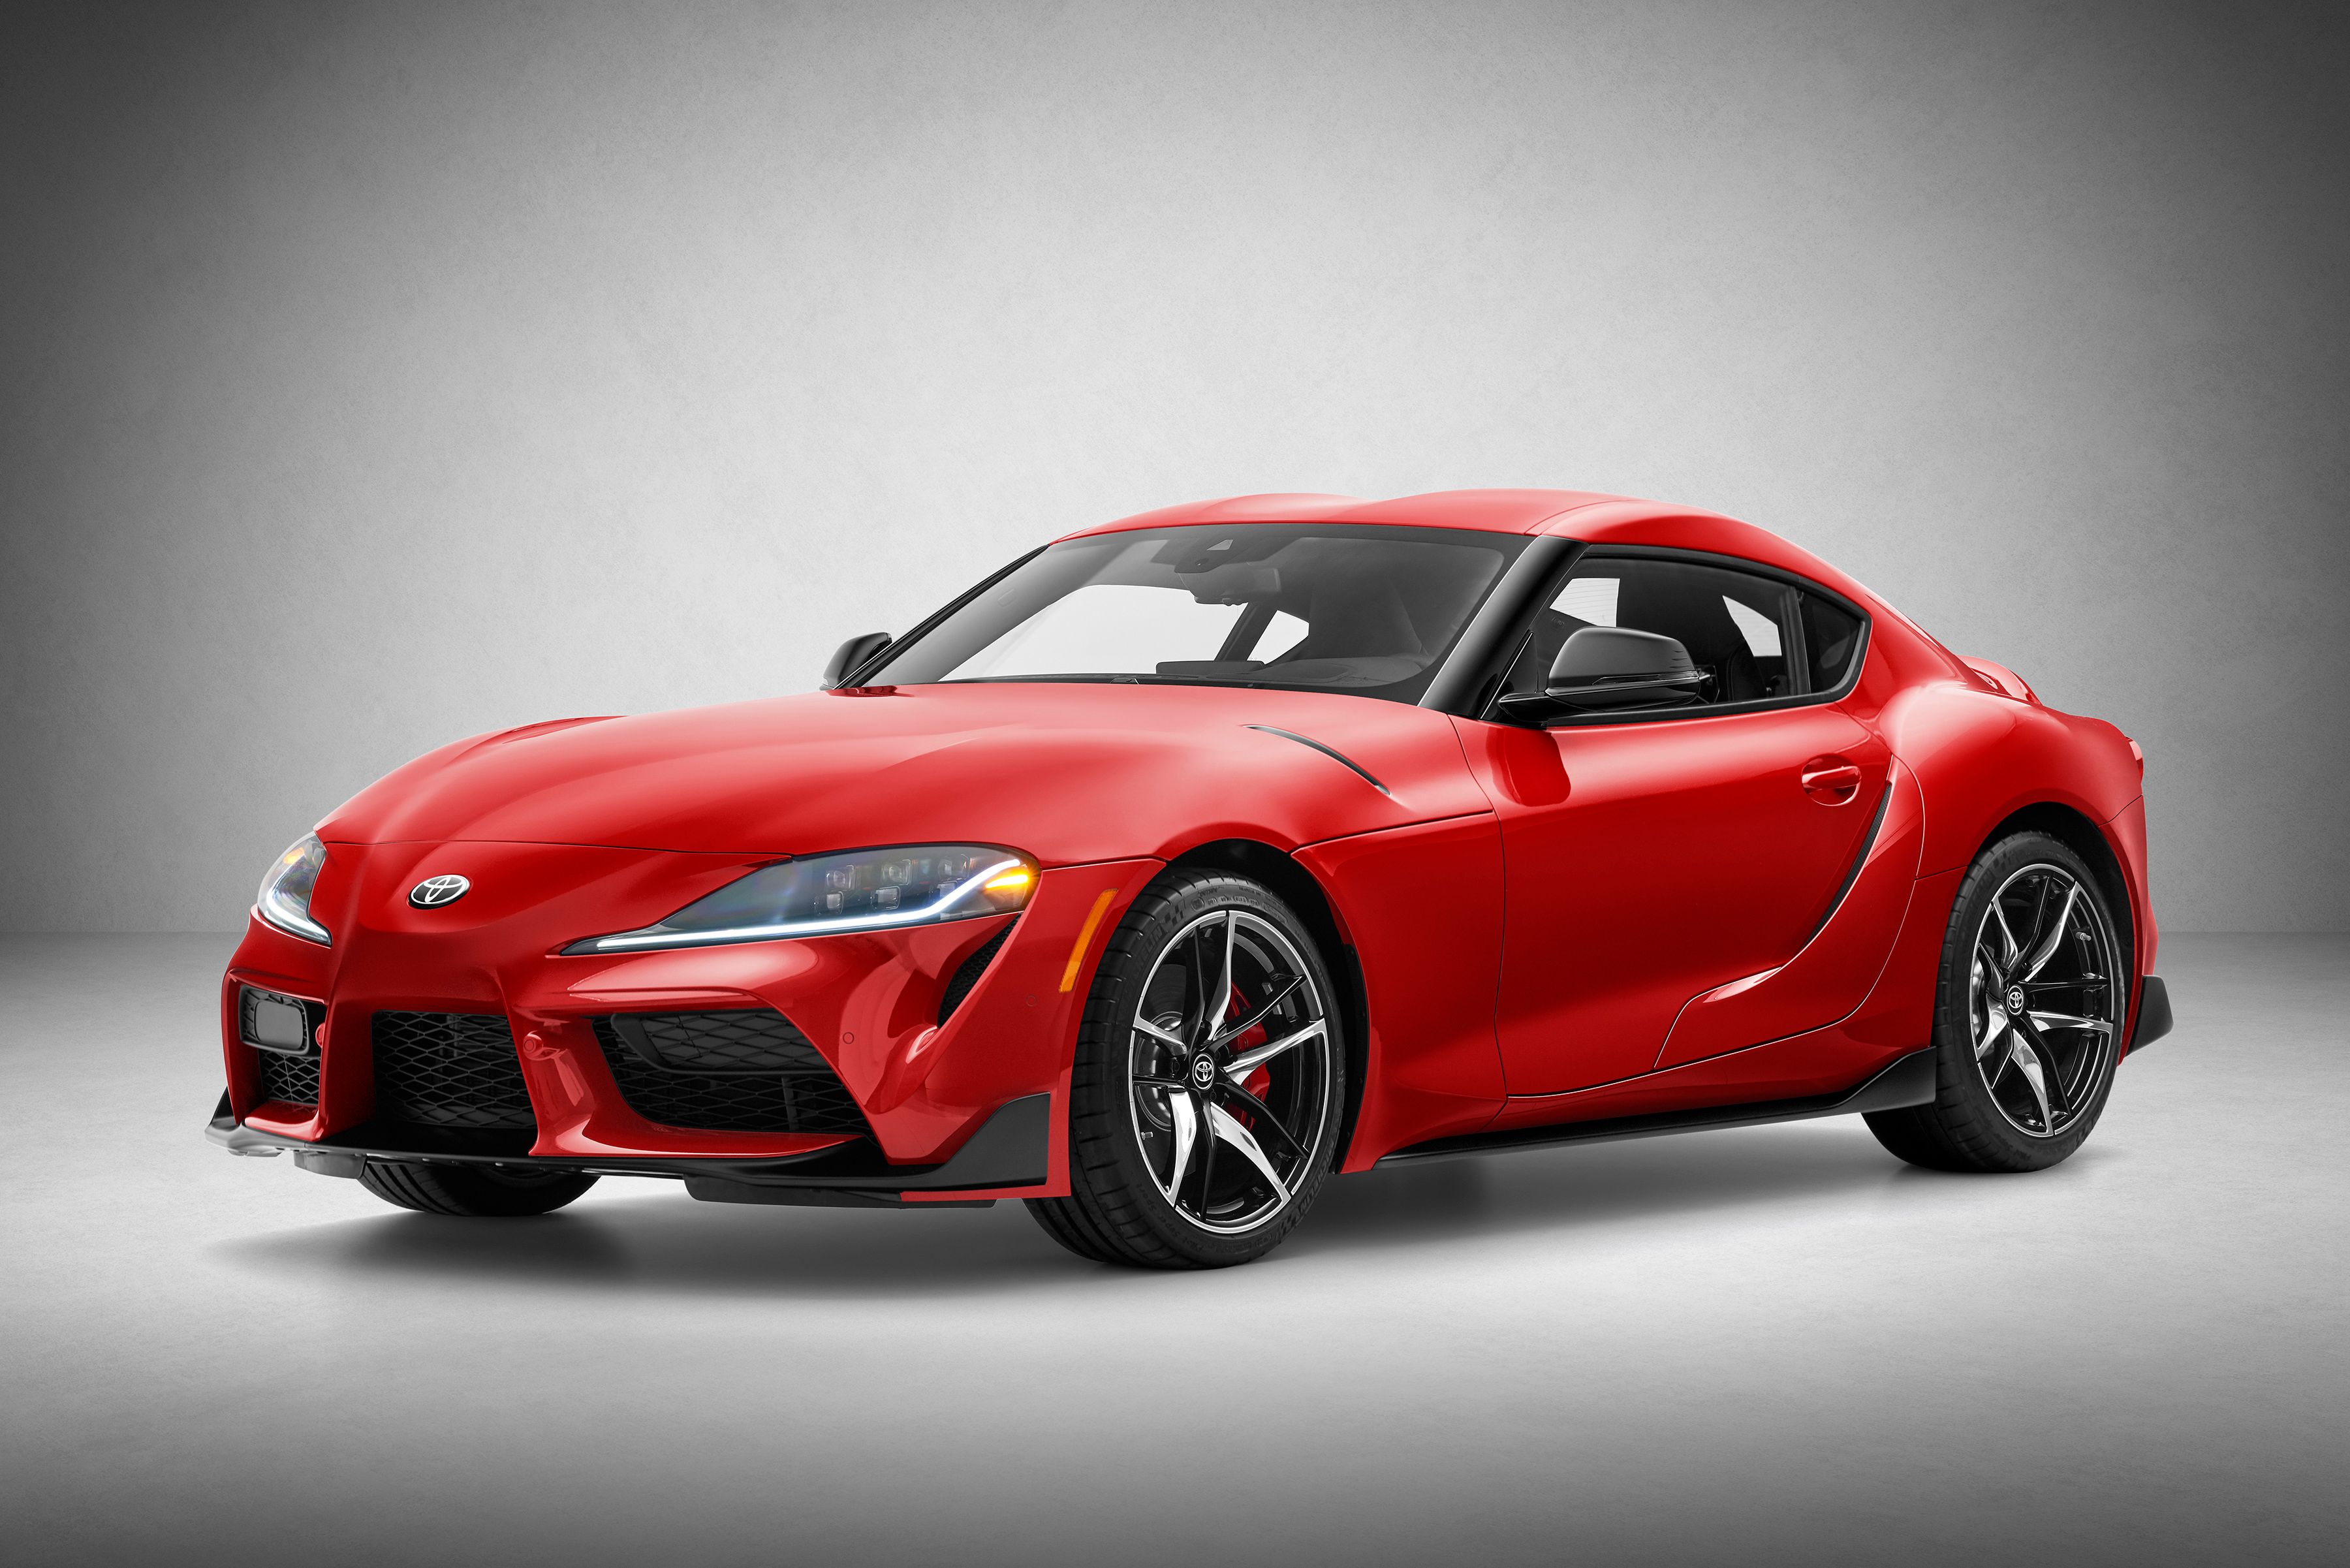 2019 The 2020 Toyota Supra has So Many Fake Vents that it Hurts